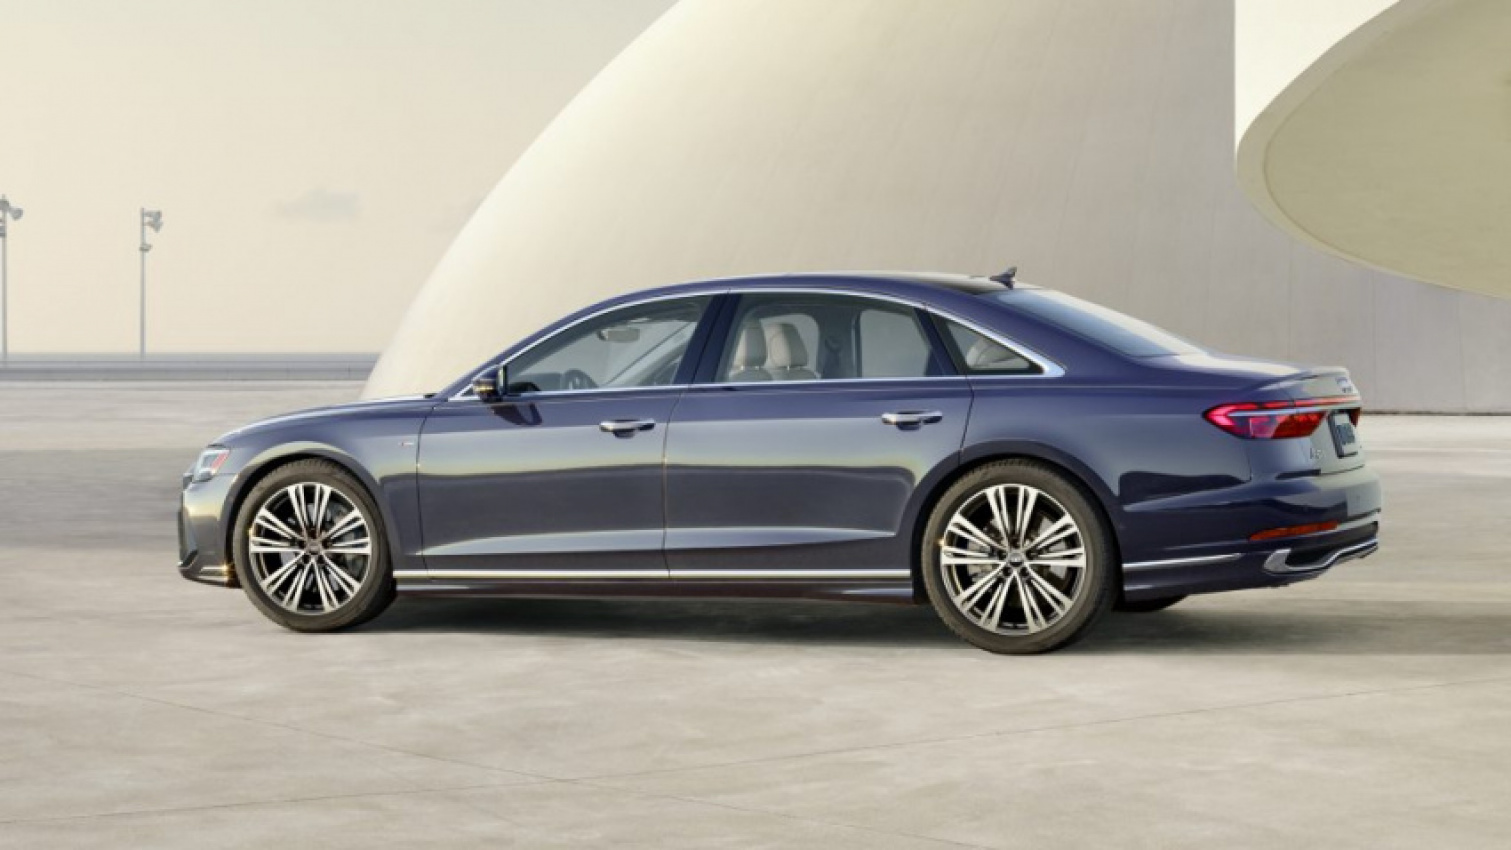 audi, autos, cars, audi a8, audi s8, sedans, is the 2022 audi s8 worth buying over the audi a8?